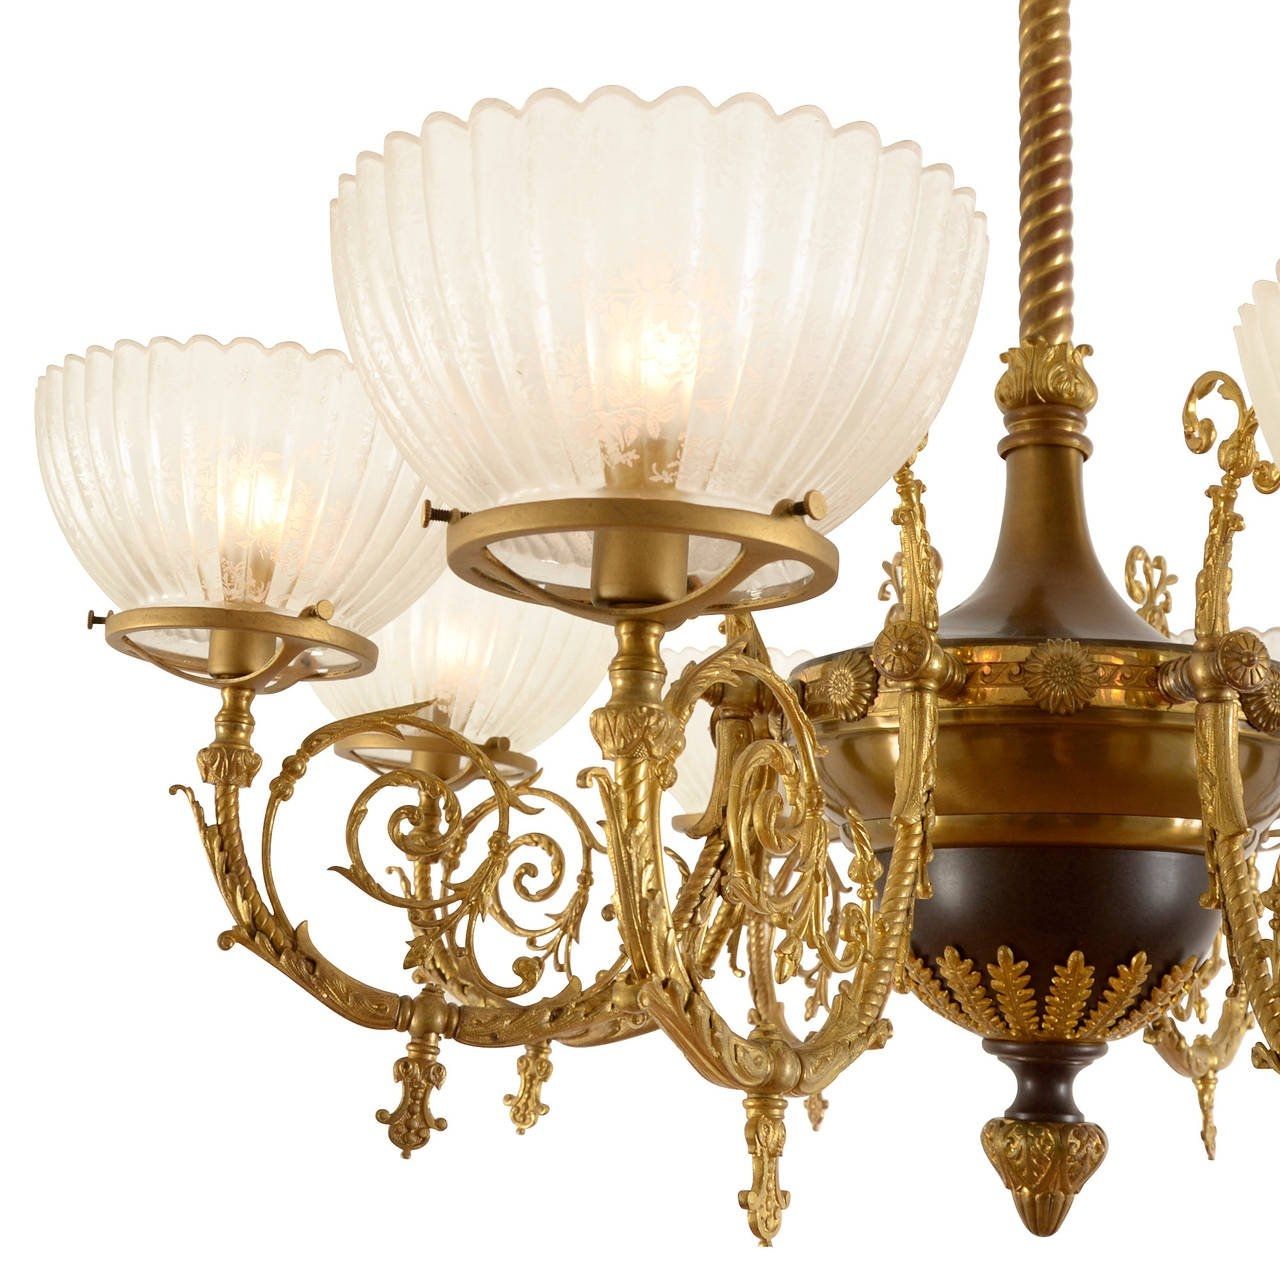 Eight Light Beaux Arts Chandelier With Ornate Ormolu Circa 1895 Intended For Ornate Chandeliers (Photo 8 of 12)